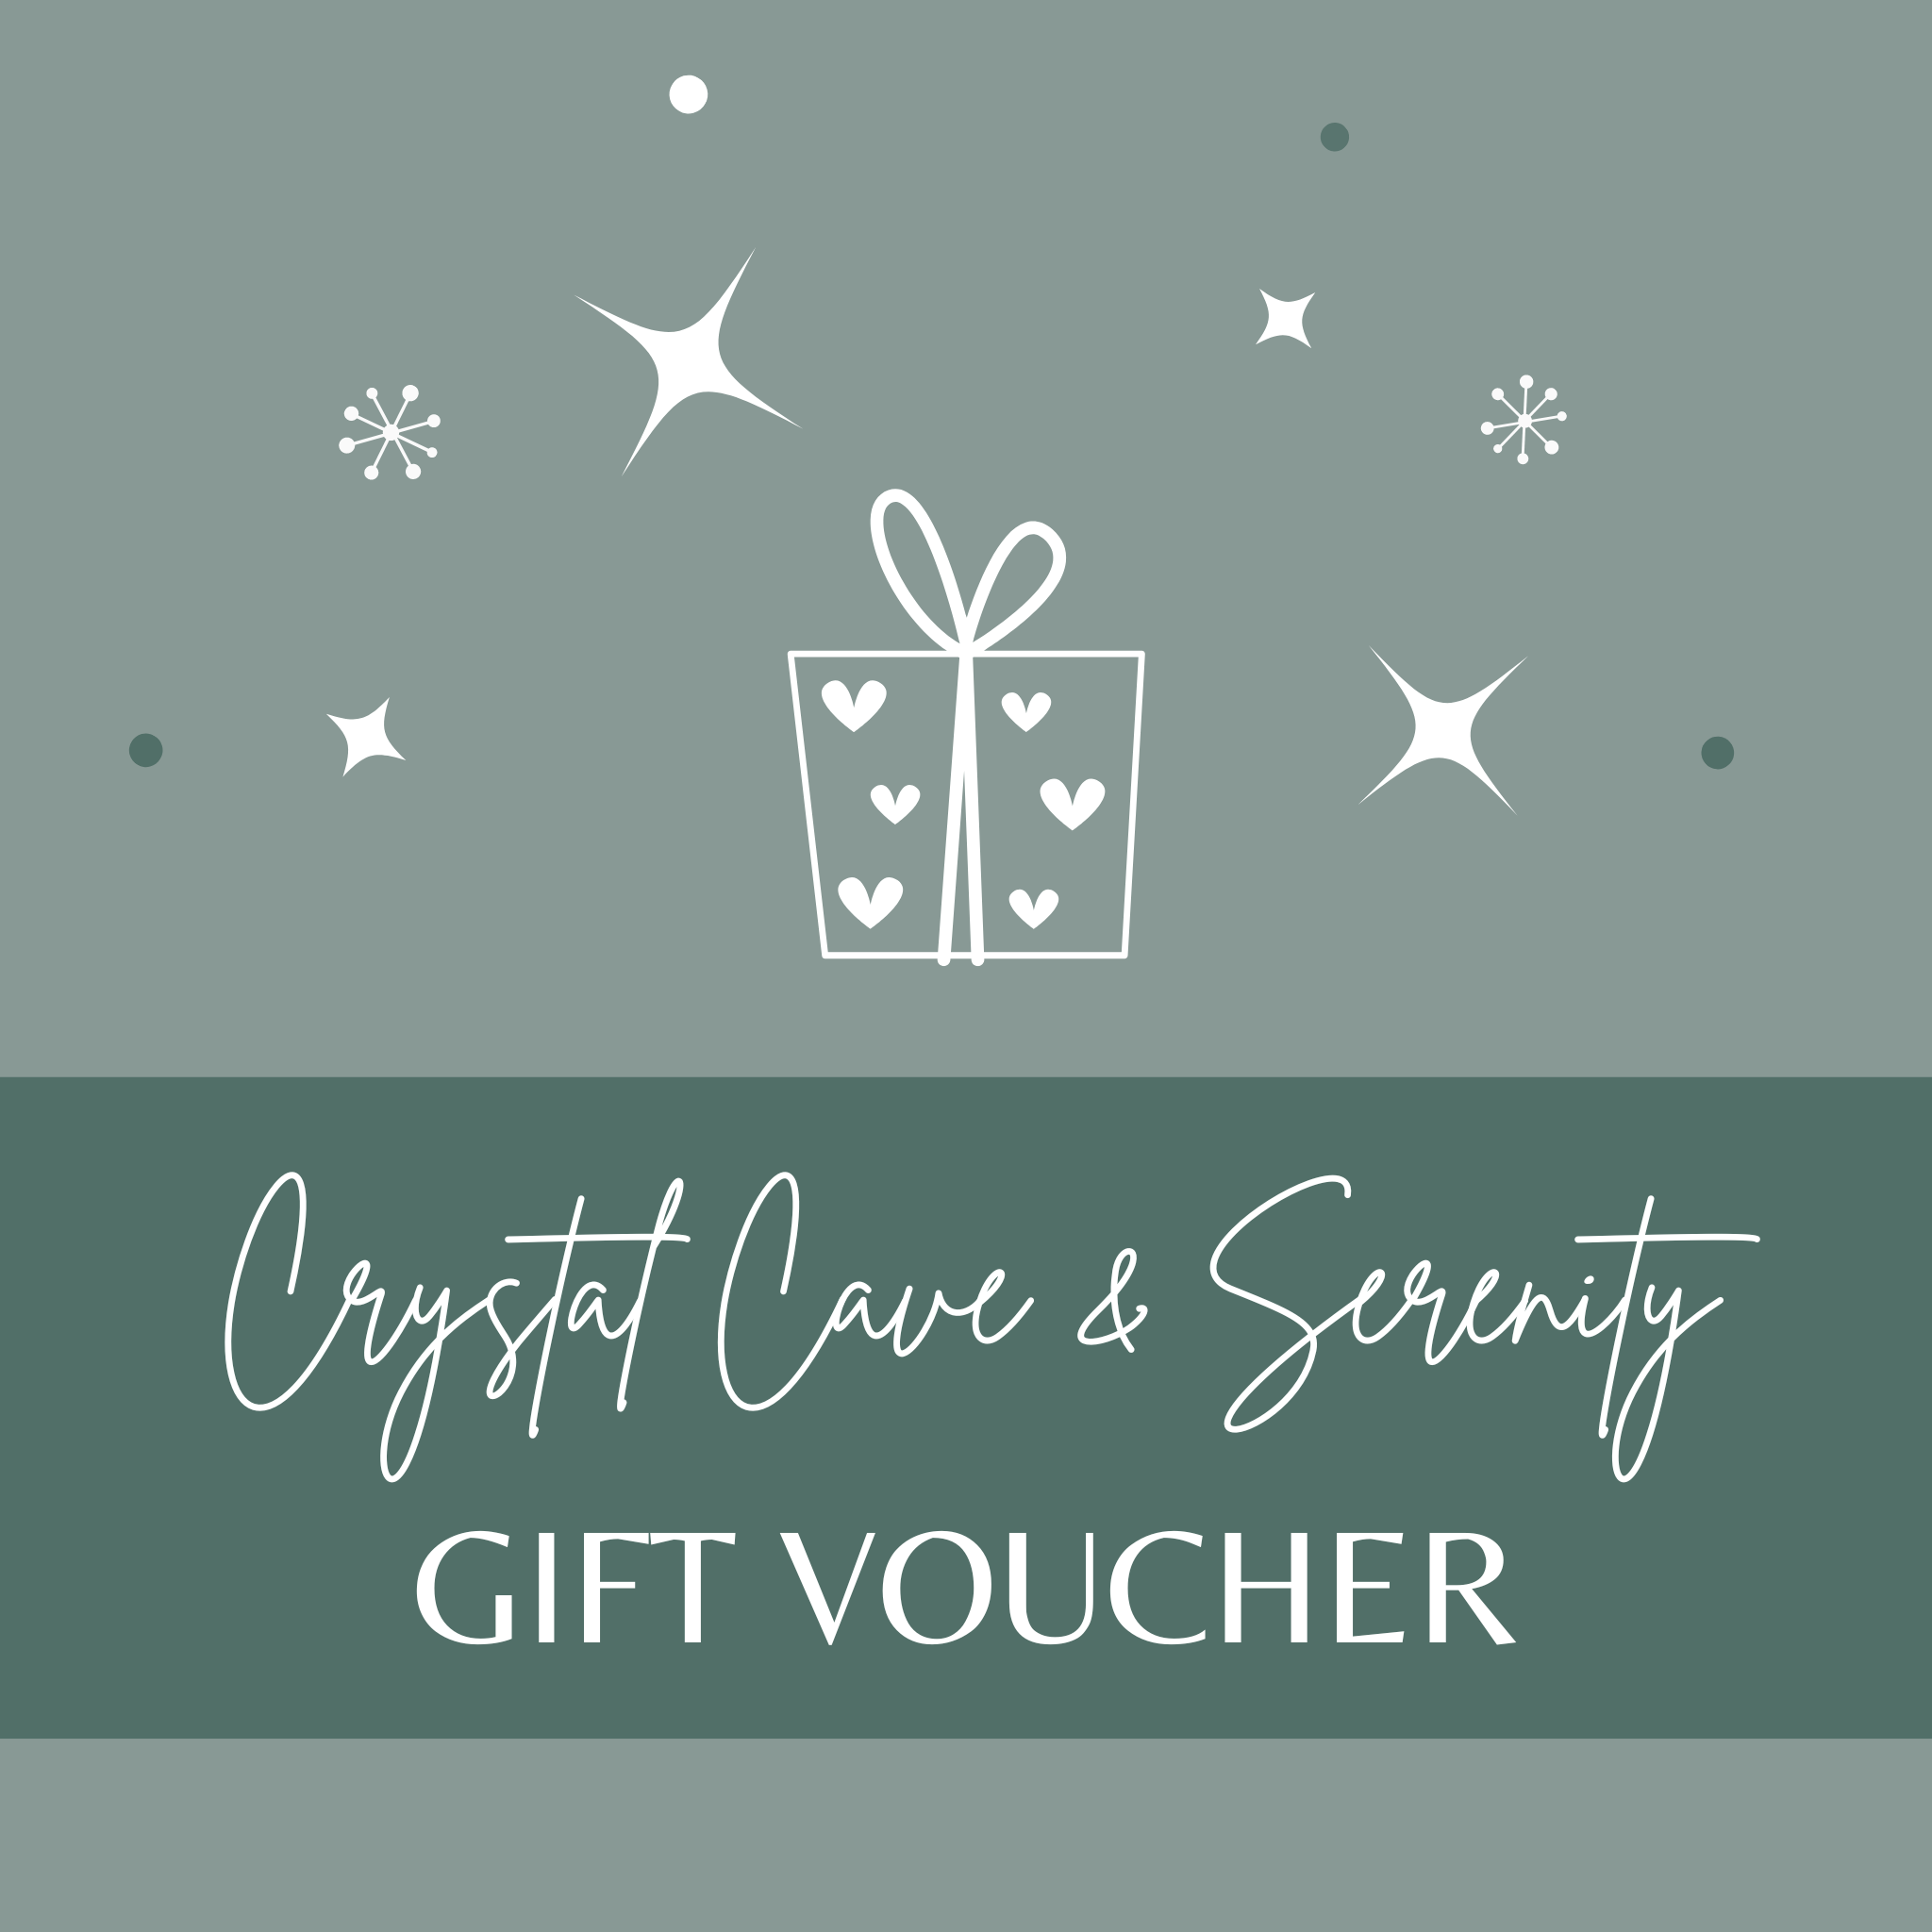 Crystal Cave and Serenity Gift Voucher